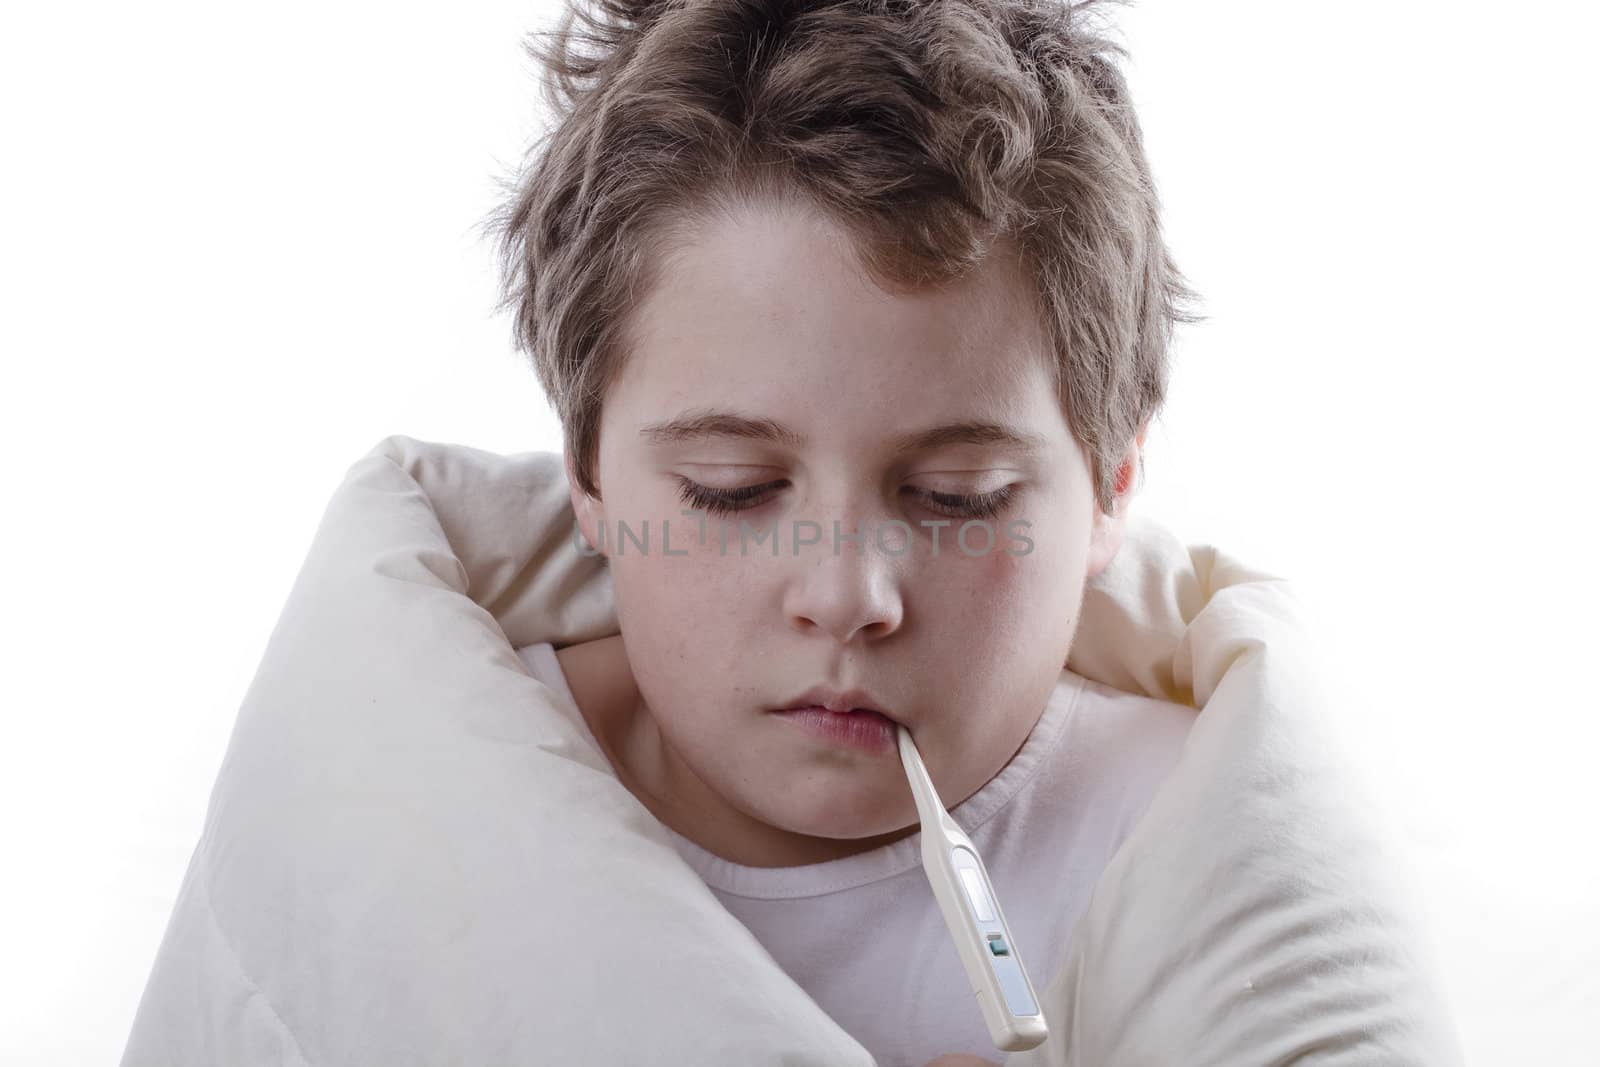 Young patient with fever, with digital thermometer and white bla by FernandoCortes